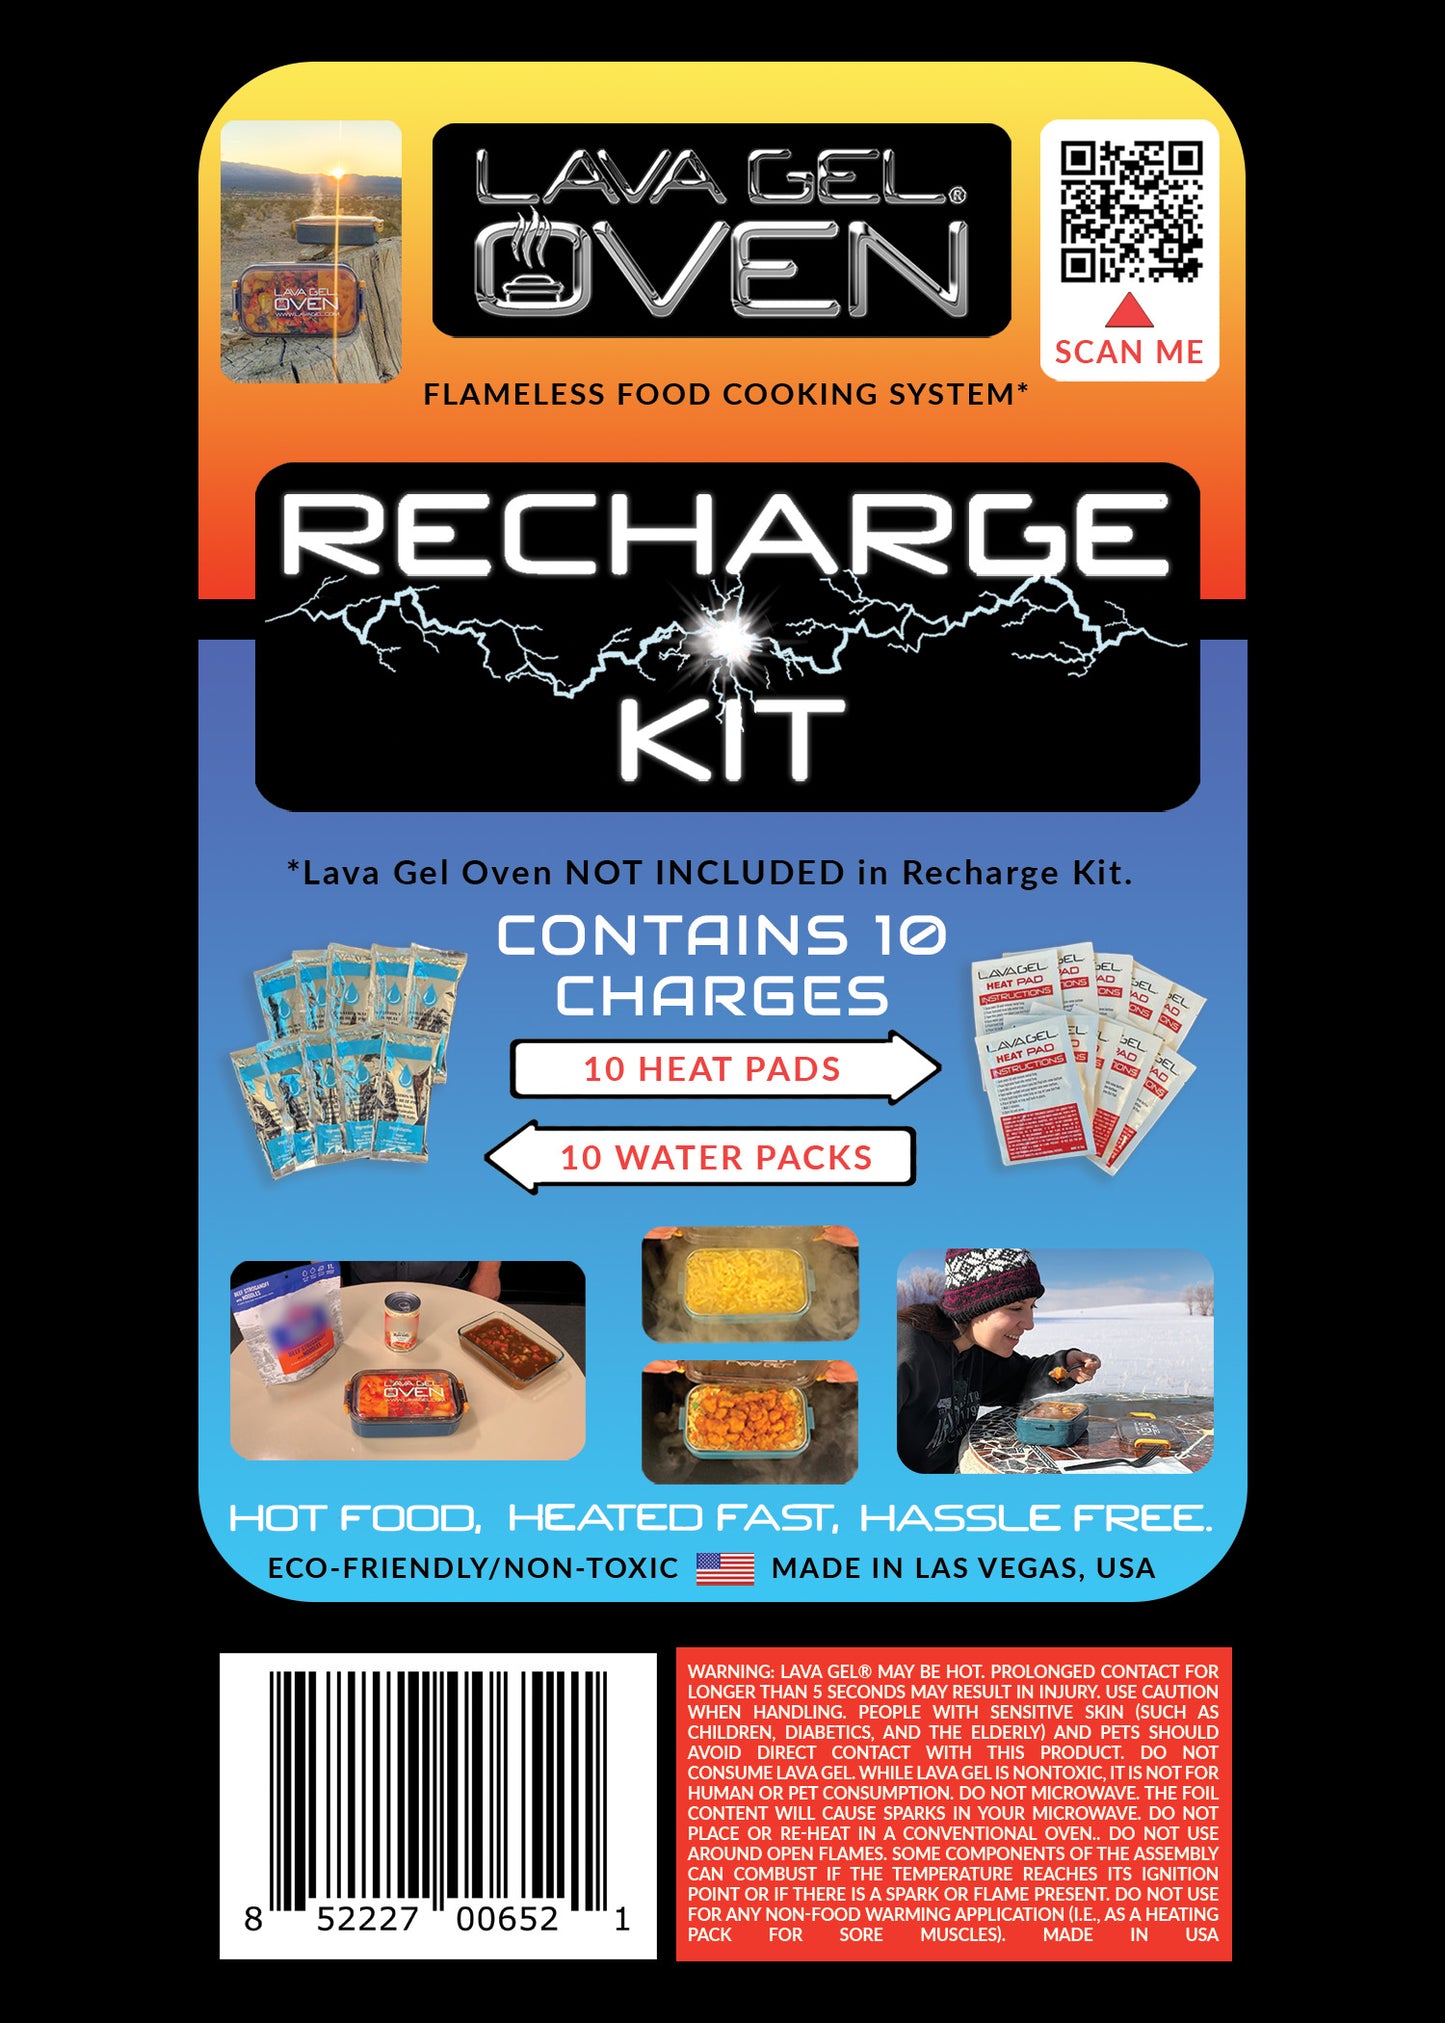 LG Oven Recharge Kit